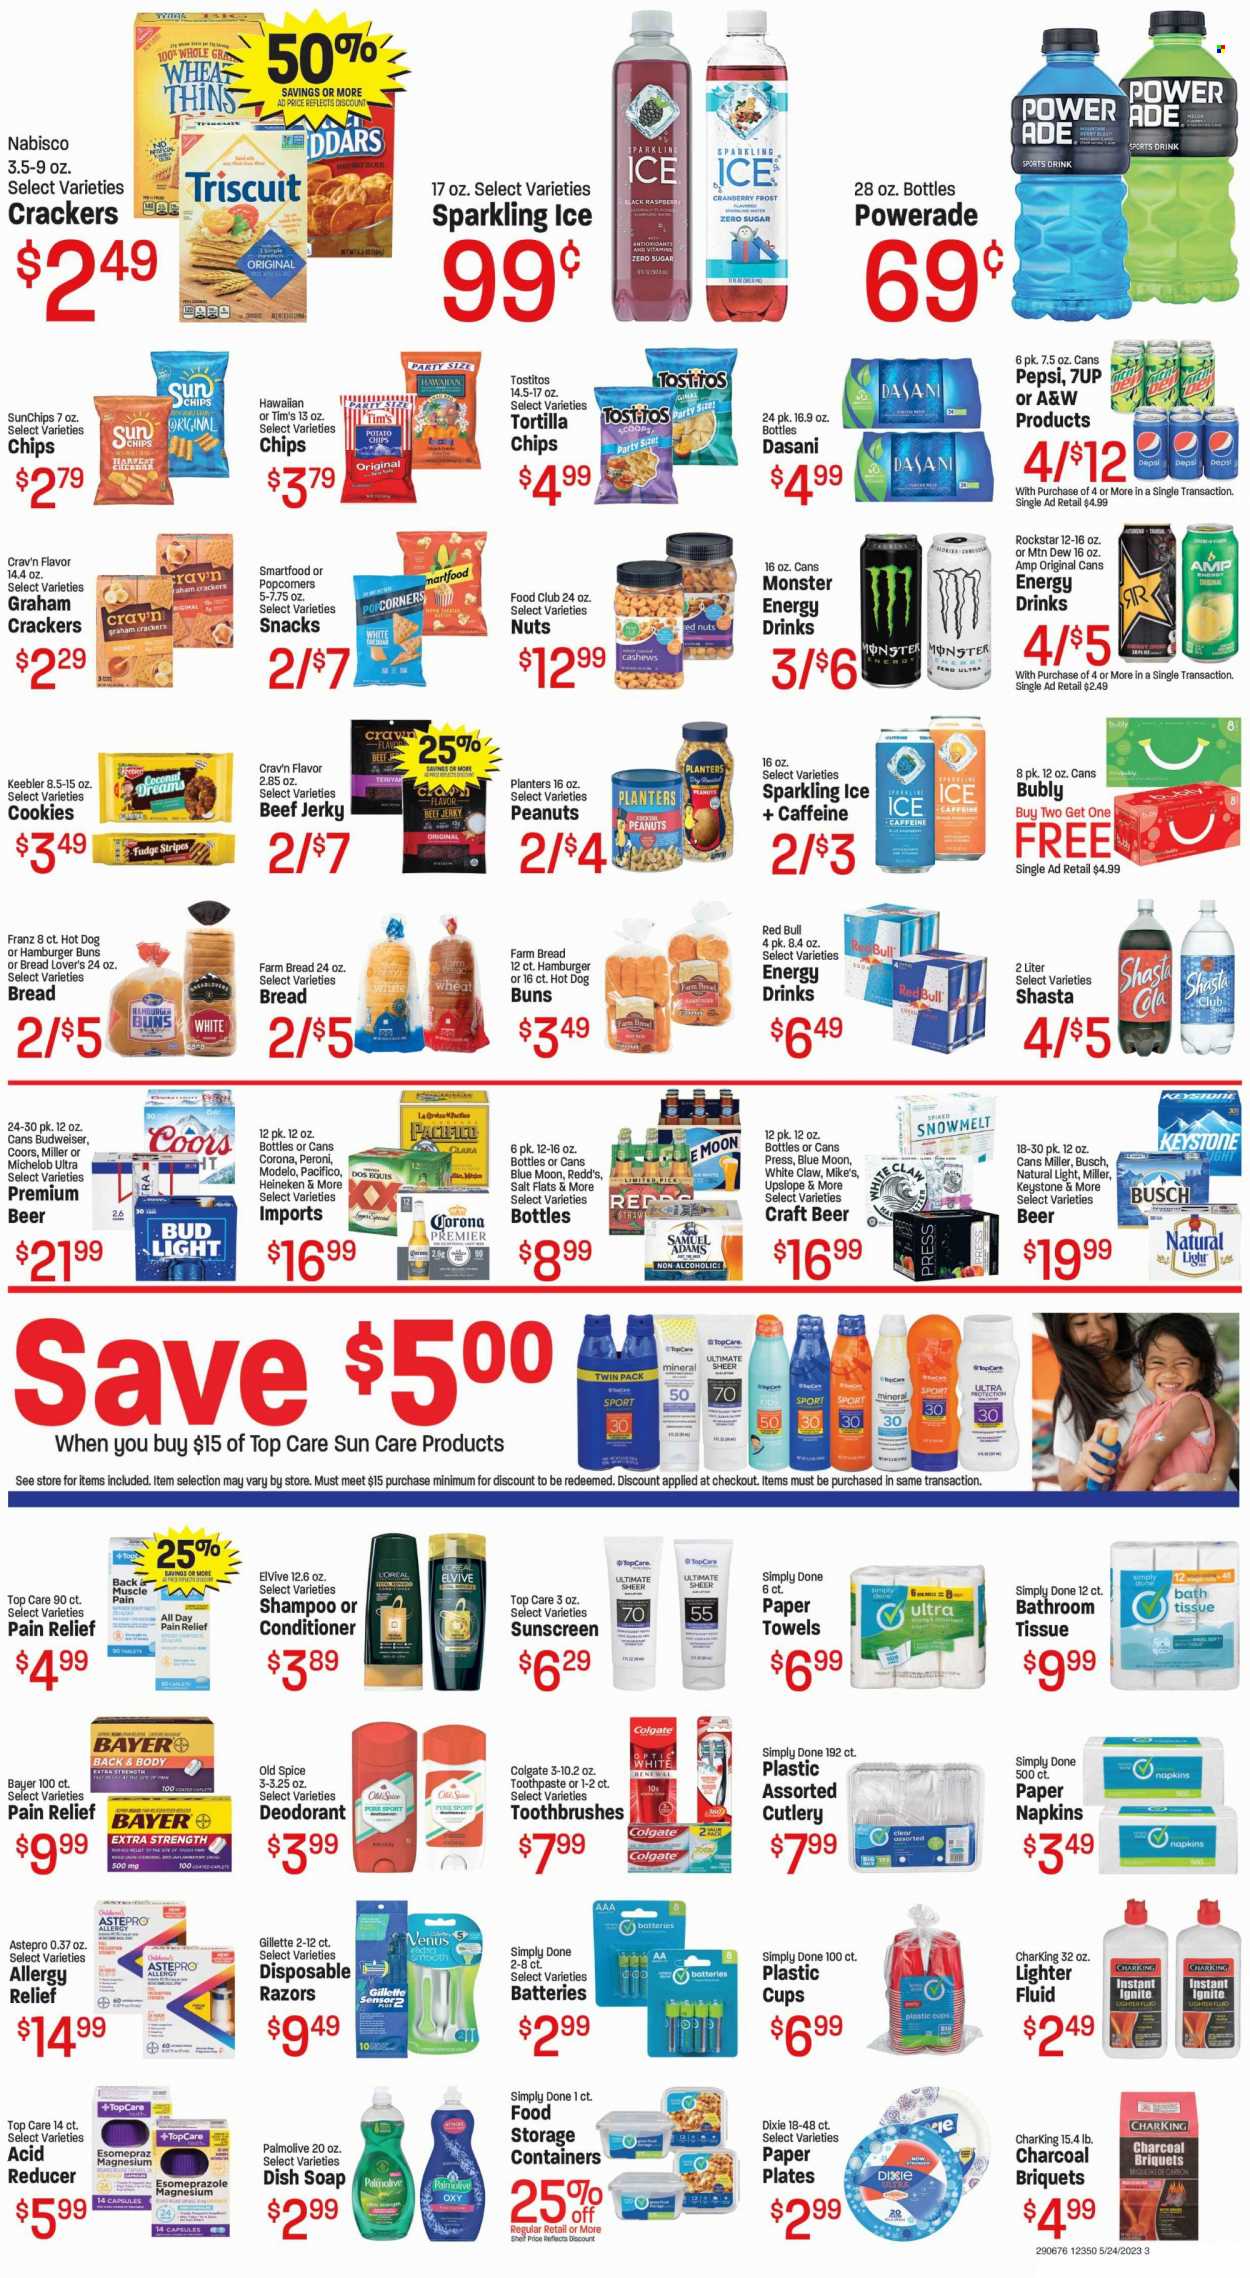 thumbnail - Fresh Market Flyer - 05/24/2023 - 05/30/2023 - Sales products - buns, burger buns, oranges, beef jerky, jerky, snack, cheese, cookies, fudge, graham crackers, crackers, Keebler, Nabisco, tortilla chips, potato chips, chips, Smartfood, Thins, popcorn, Tostitos, honey, cashews, roasted peanuts, peanuts, Planters, Mountain Dew, Powerade, Pepsi, energy drink, Monster, soft drink, 7UP, Red Bull, Monster Energy, A&W, Rockstar, flavored water, sparkling water, water, alcohol, White Claw, beer, Busch, Bud Light, Corona Extra, Heineken, Peroni, Miller, Lager, Keystone, Modelo, napkins, bath tissue, kitchen towels, paper towels, dishwashing liquid, shampoo, Old Spice, Palmolive, Colgate, toothpaste, L’Oréal, sun care, conditioner, body lotion, anti-perspirant, deodorant, Gillette, razor, Venus, disposable razor, plate, cup, straw, storage box, storage container, paper plate, Dixie, battery, briquettes, magnesium, pain relief, aspirin, Bayer, allergy relief, Budweiser, melons, Coors, Dos Equis, Blue Moon, Michelob. Page 3.